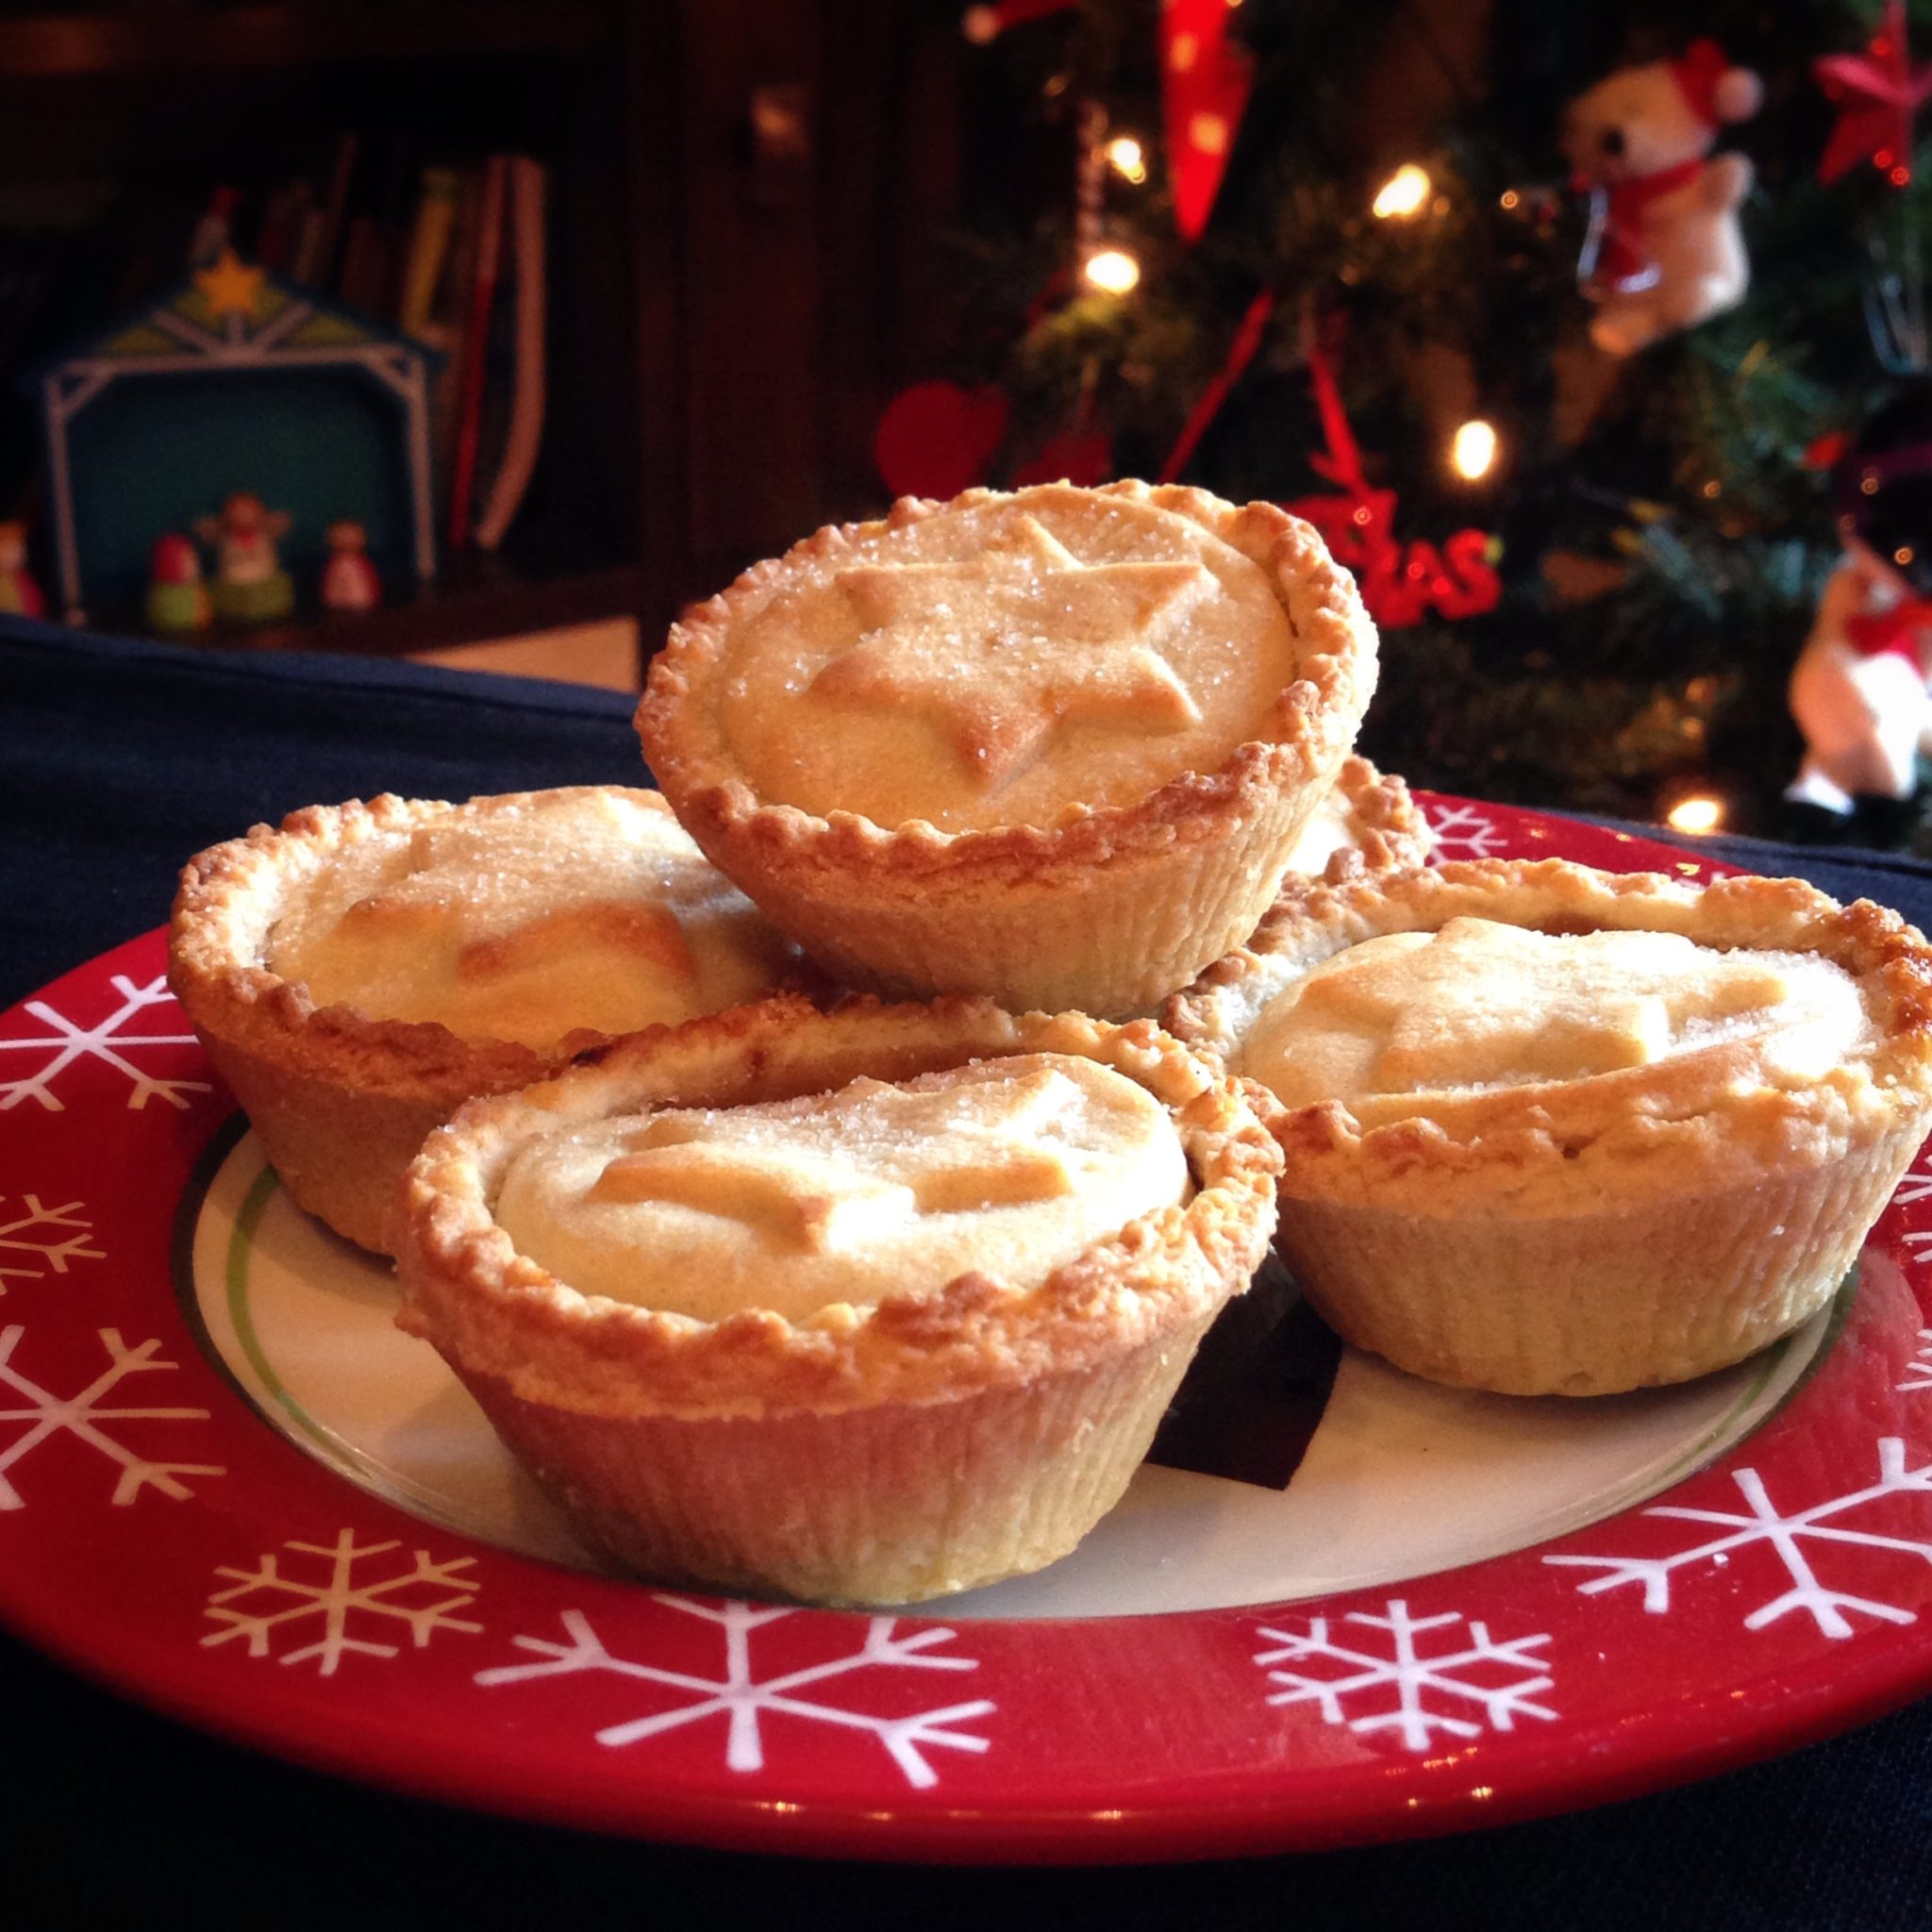 16 December – Christmas Mince Pies